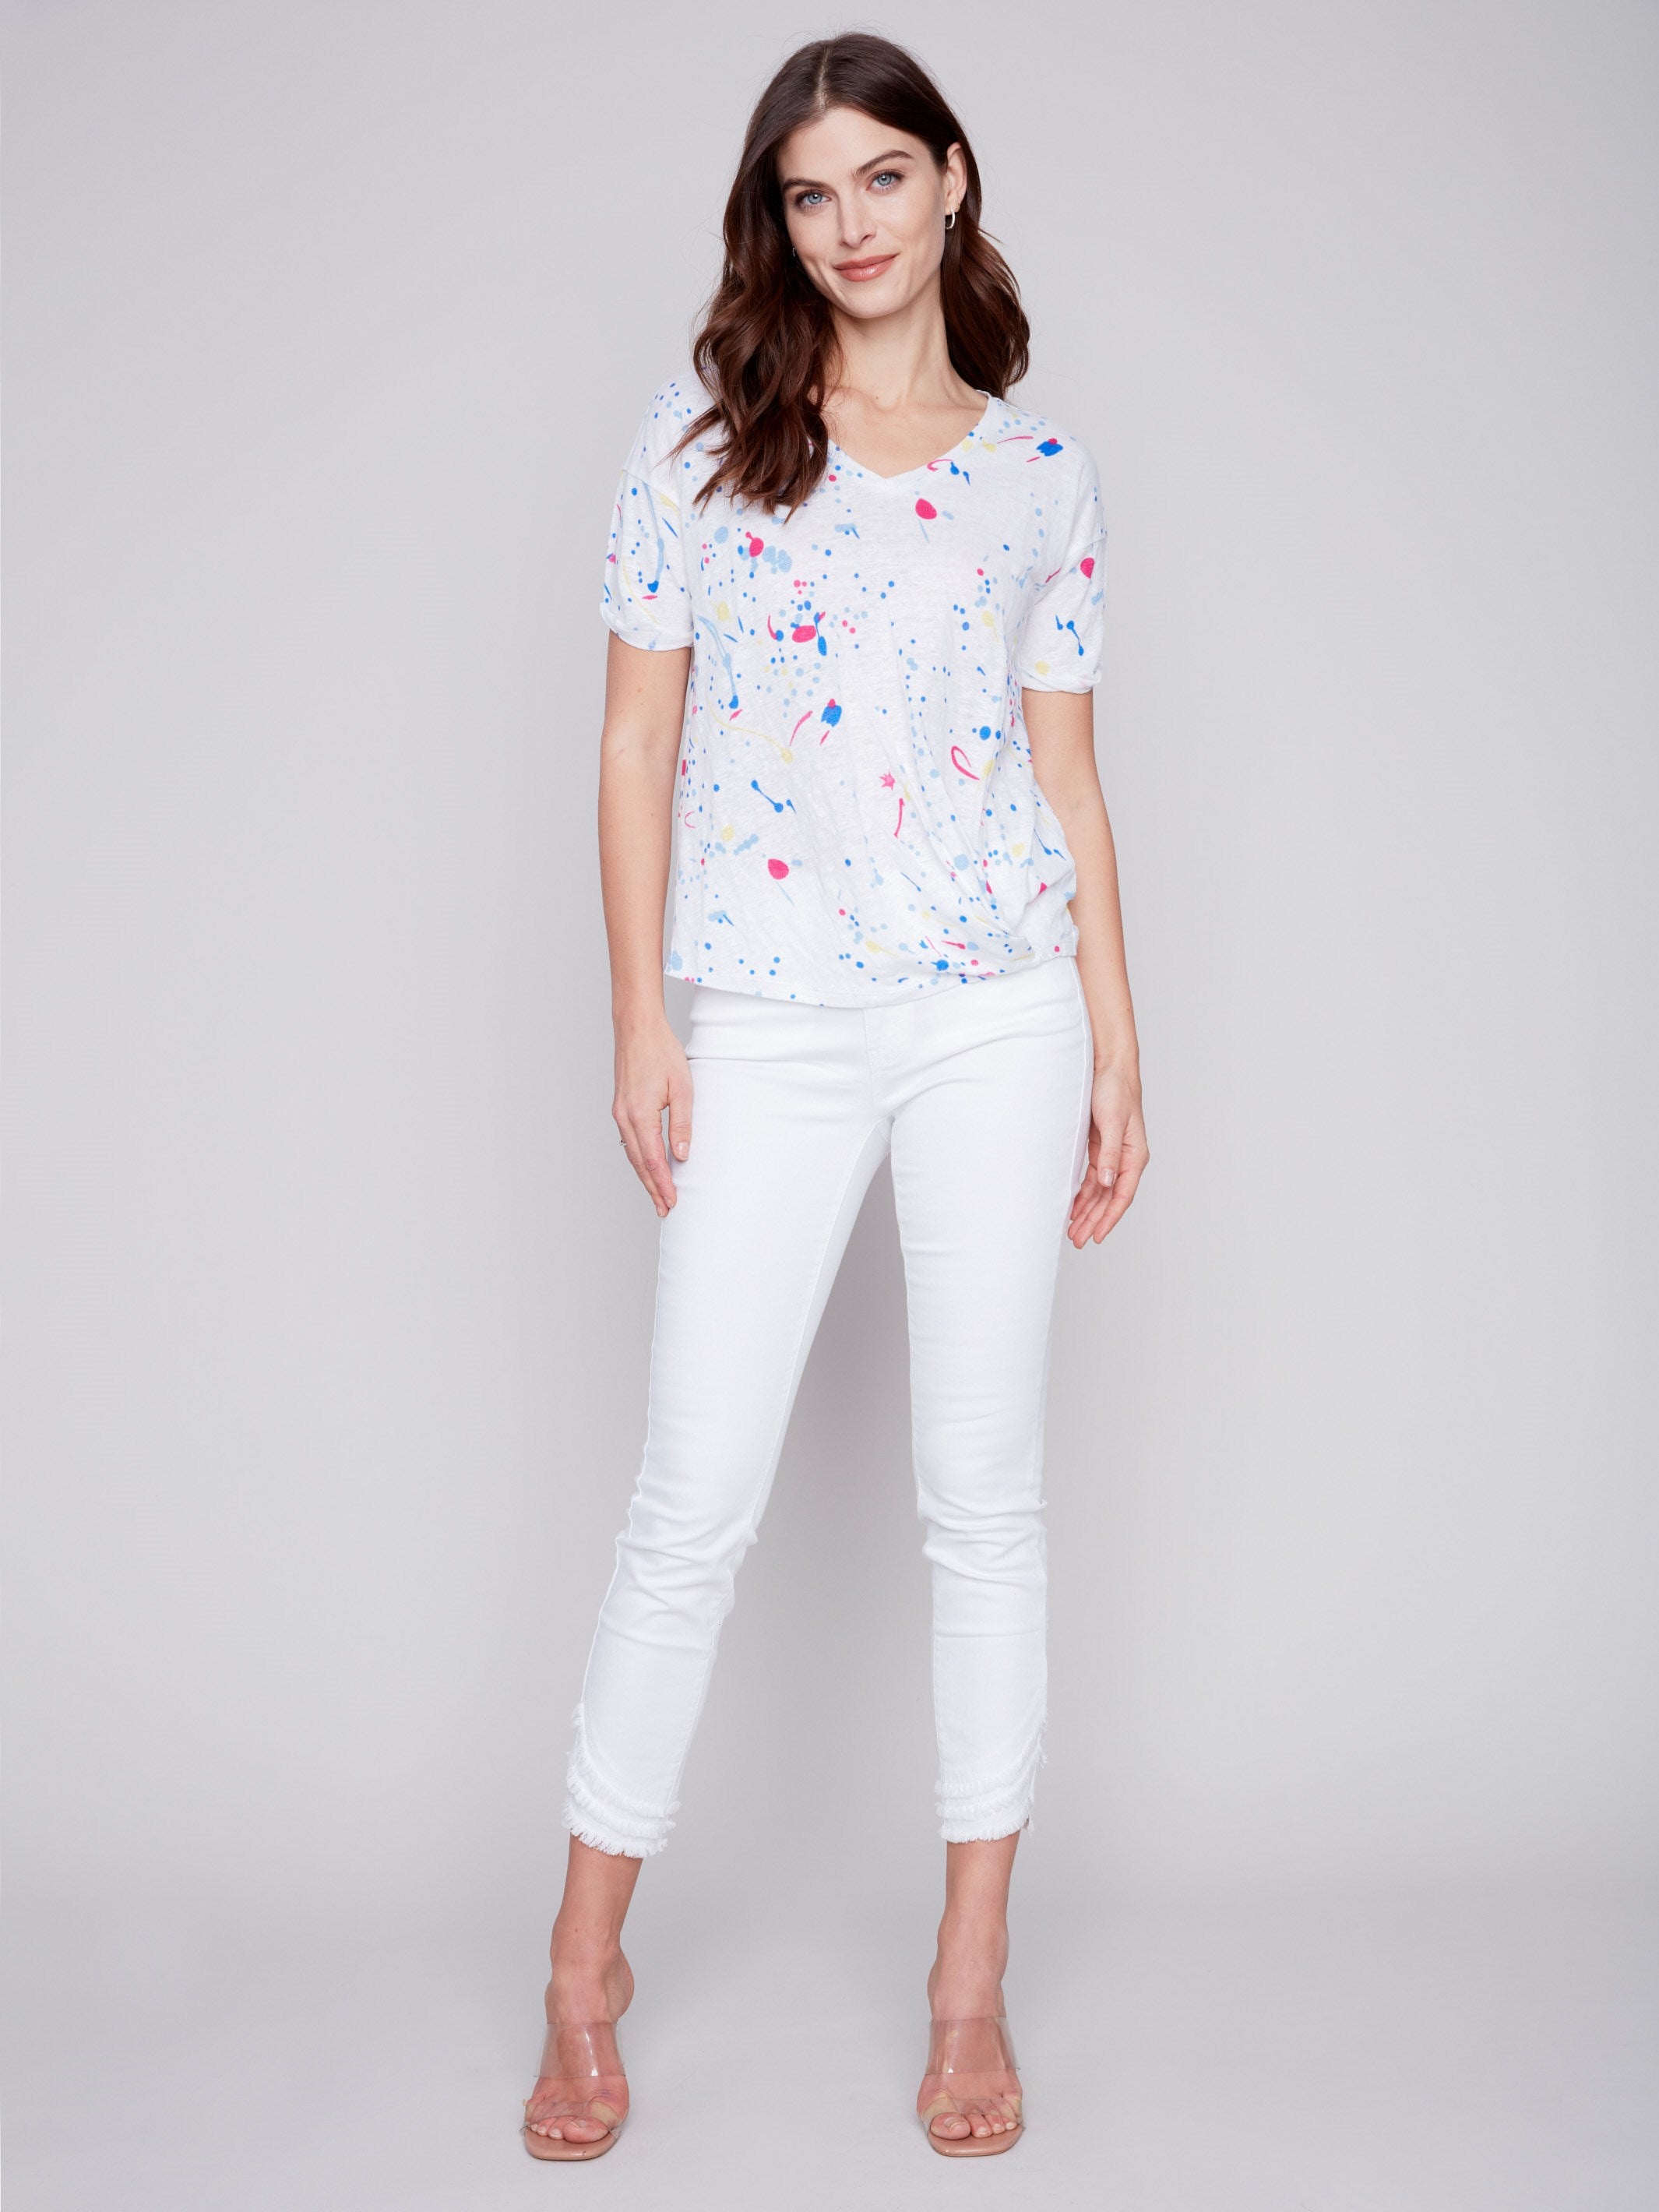 Charlie B Printed Linen Top With Front Twist Knot - Splash - Image 6